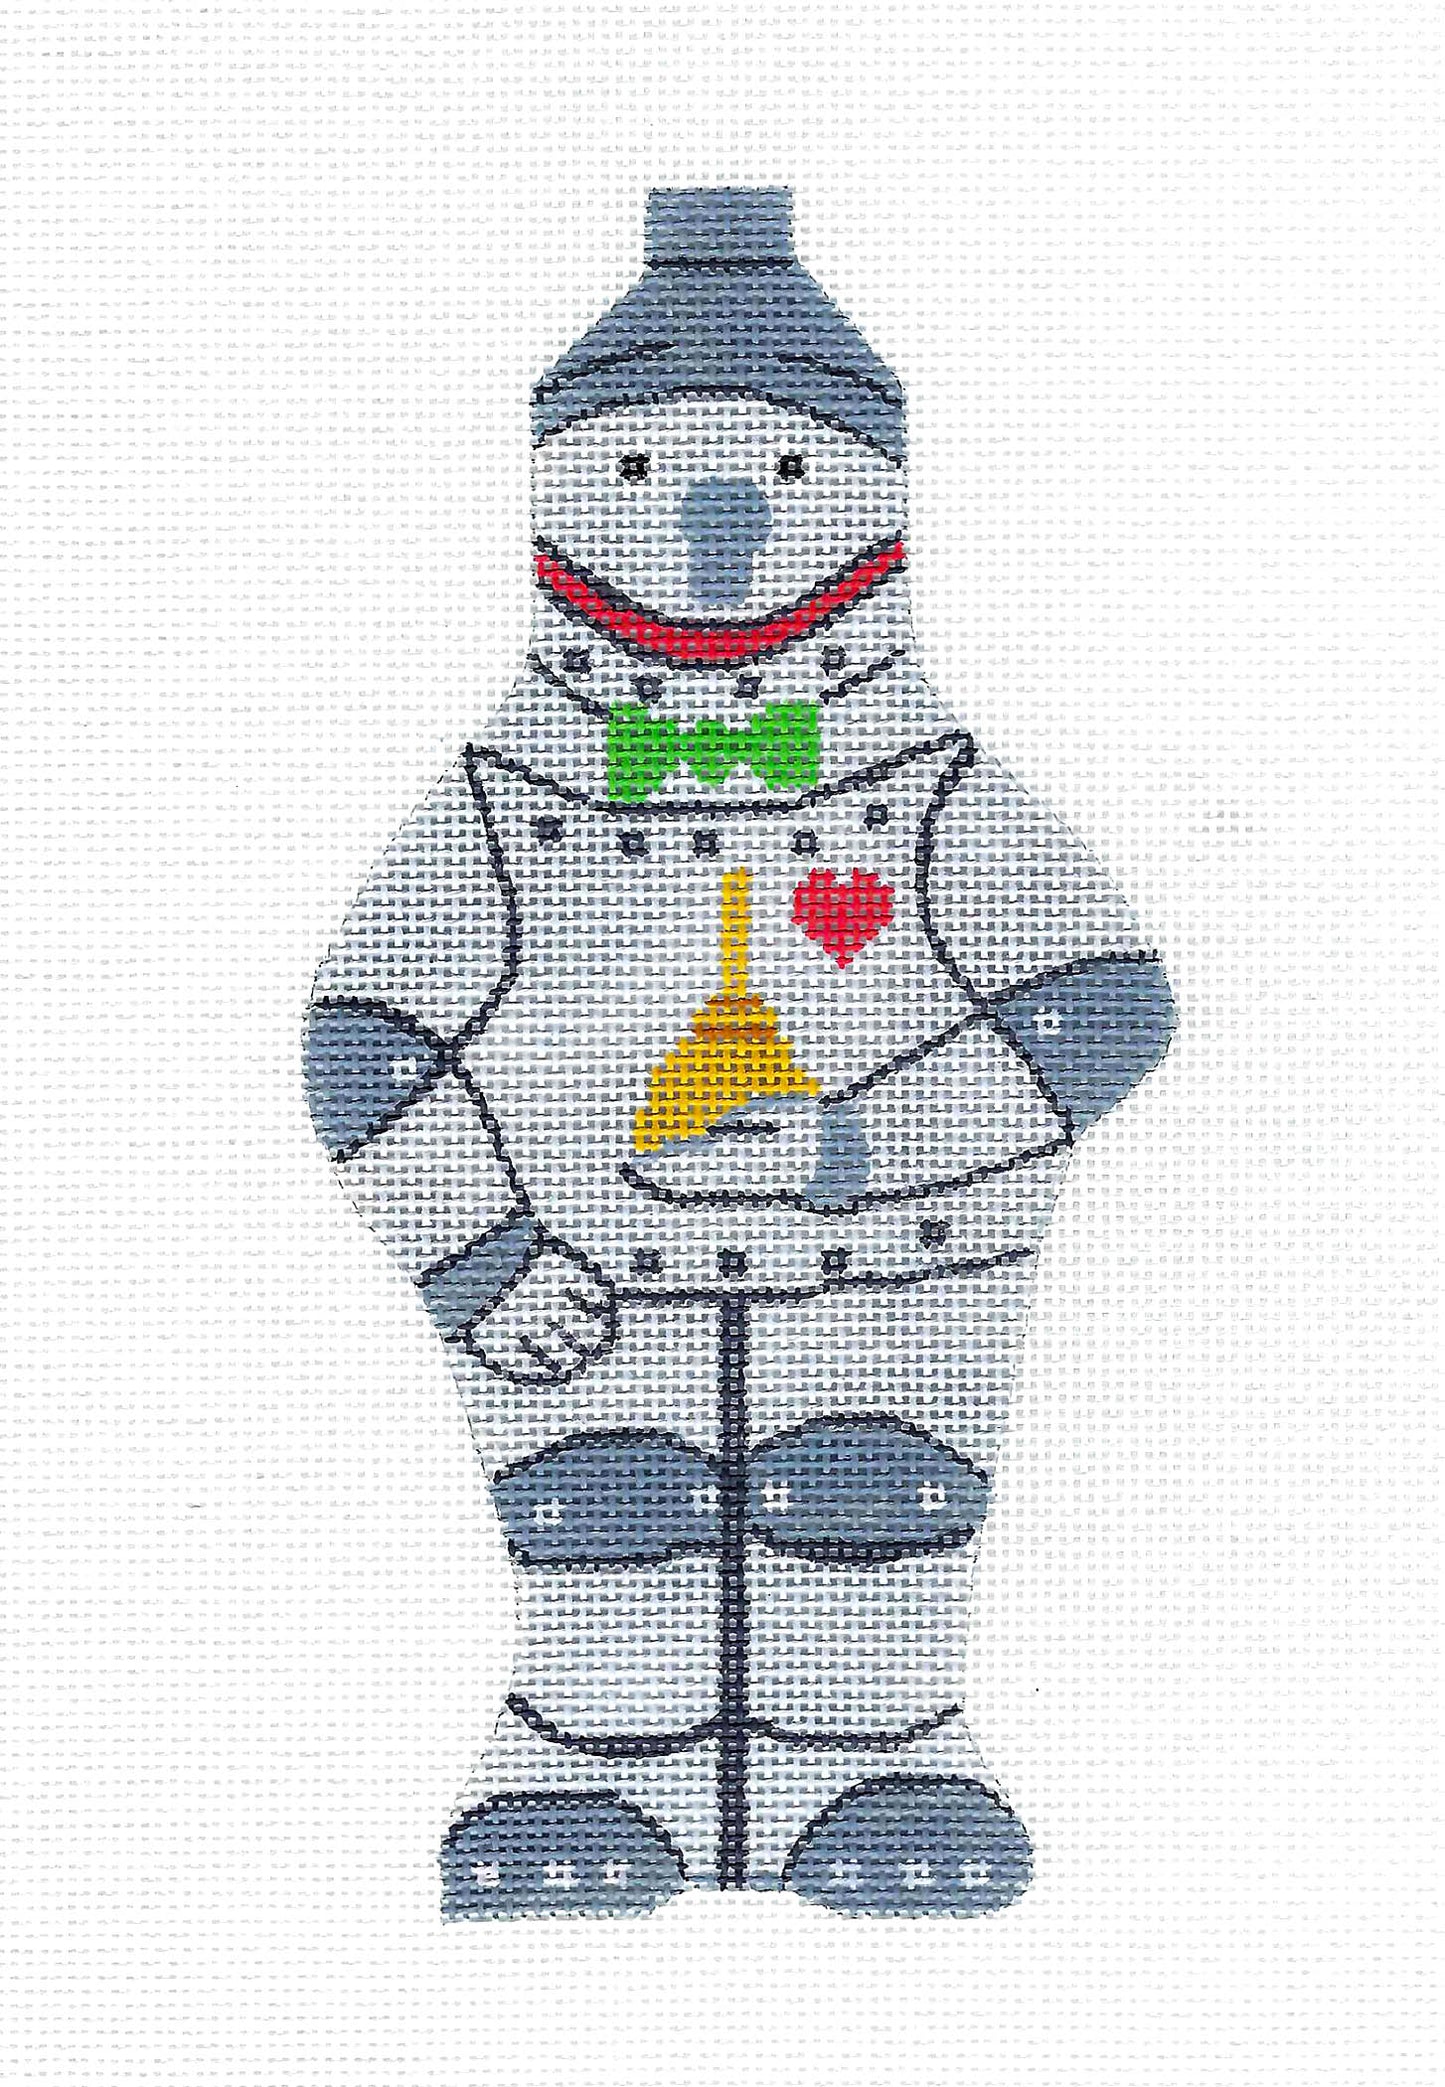 The Wizard of OZ "The Tin Man" handpainted 18 Mesh Needlepoint Canvas by Silver Needle